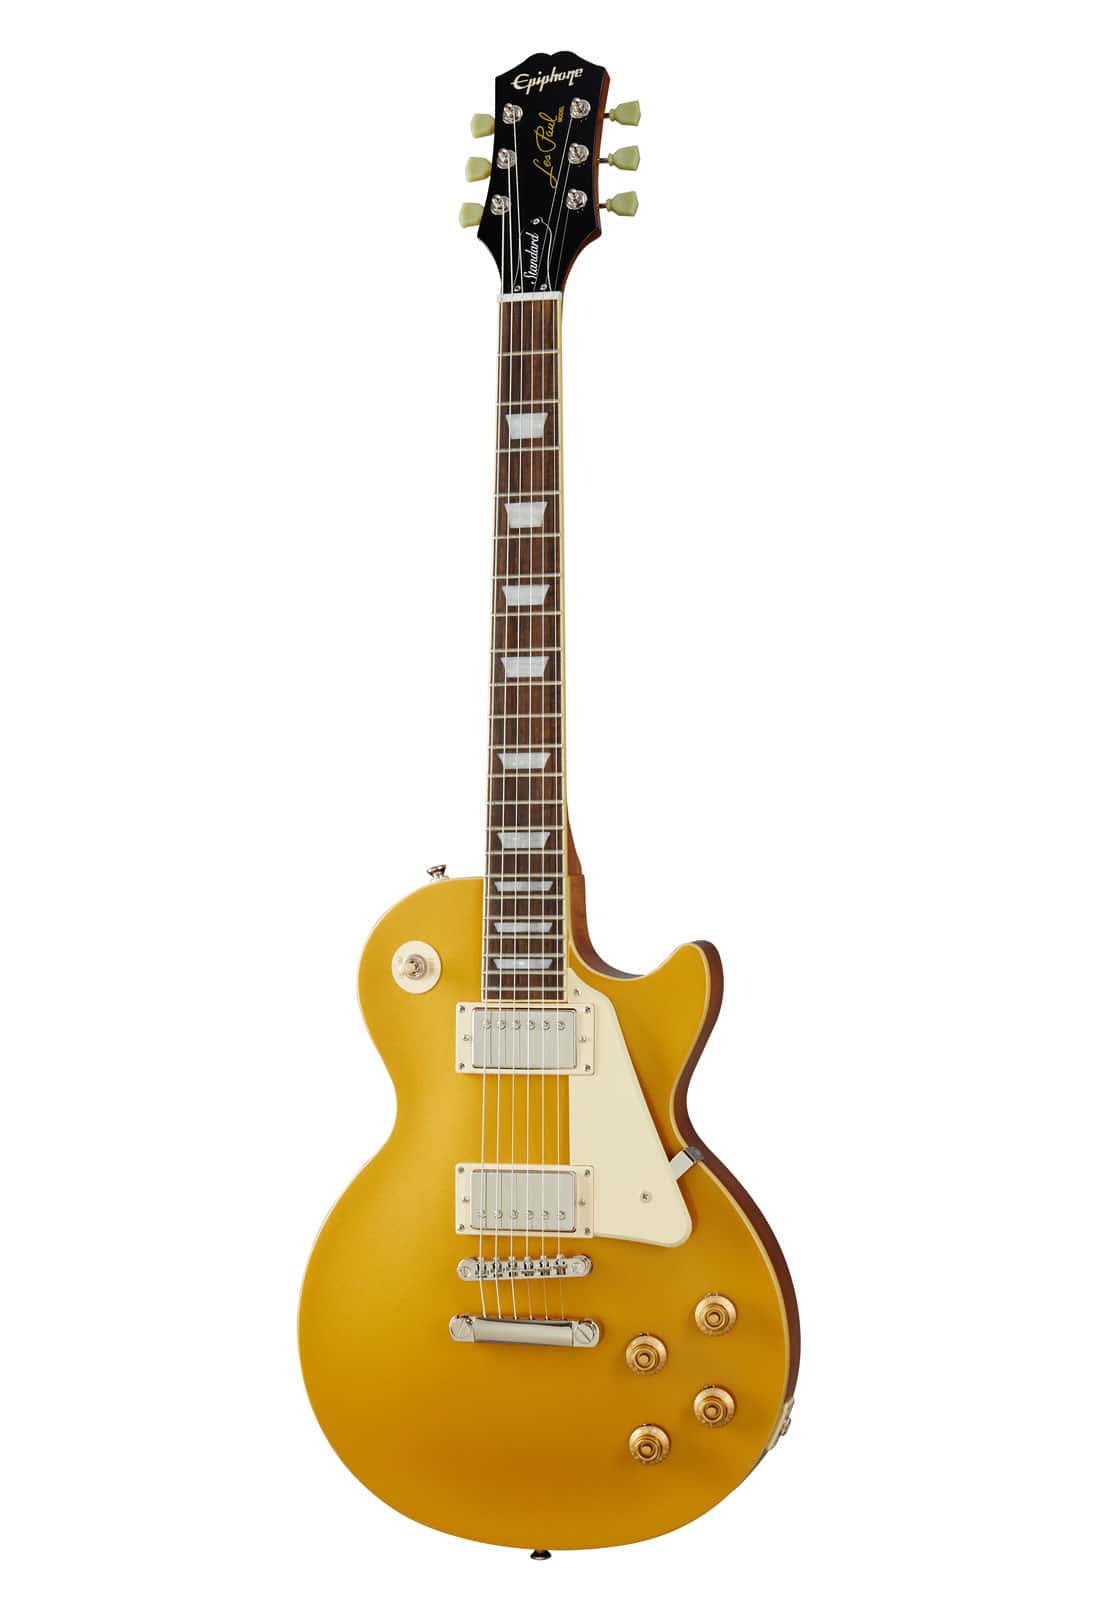 EPIPHONE INSPIRED BY GIBSON ORIGINAL LES PAUL STANDARD 50S METALLIC GOLD